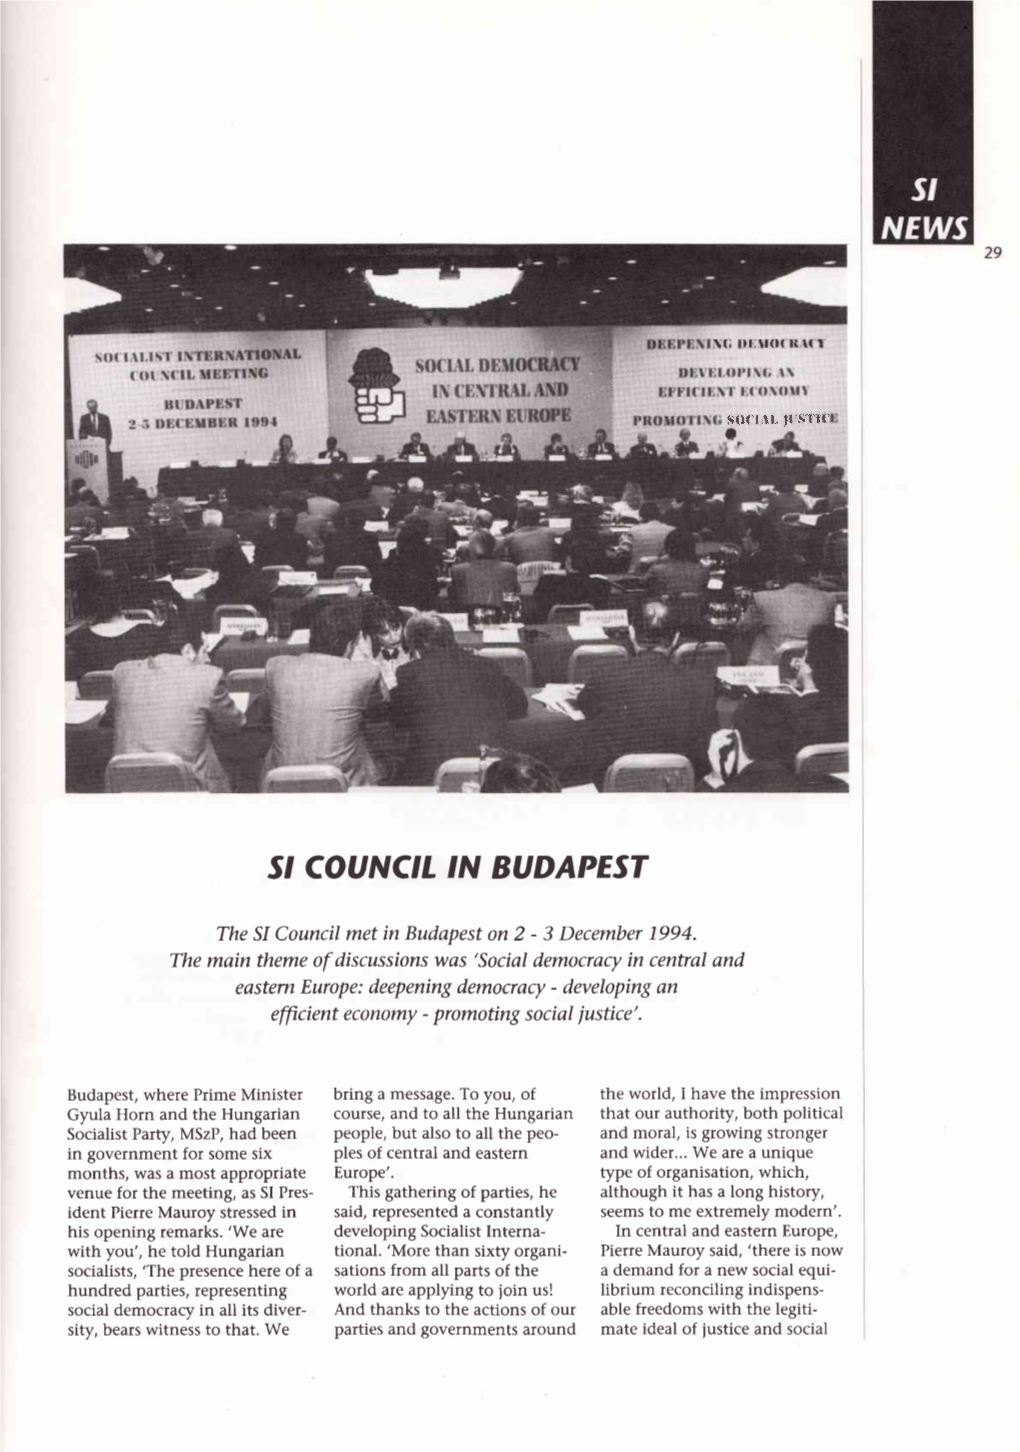 Si Counc'i in Budapest